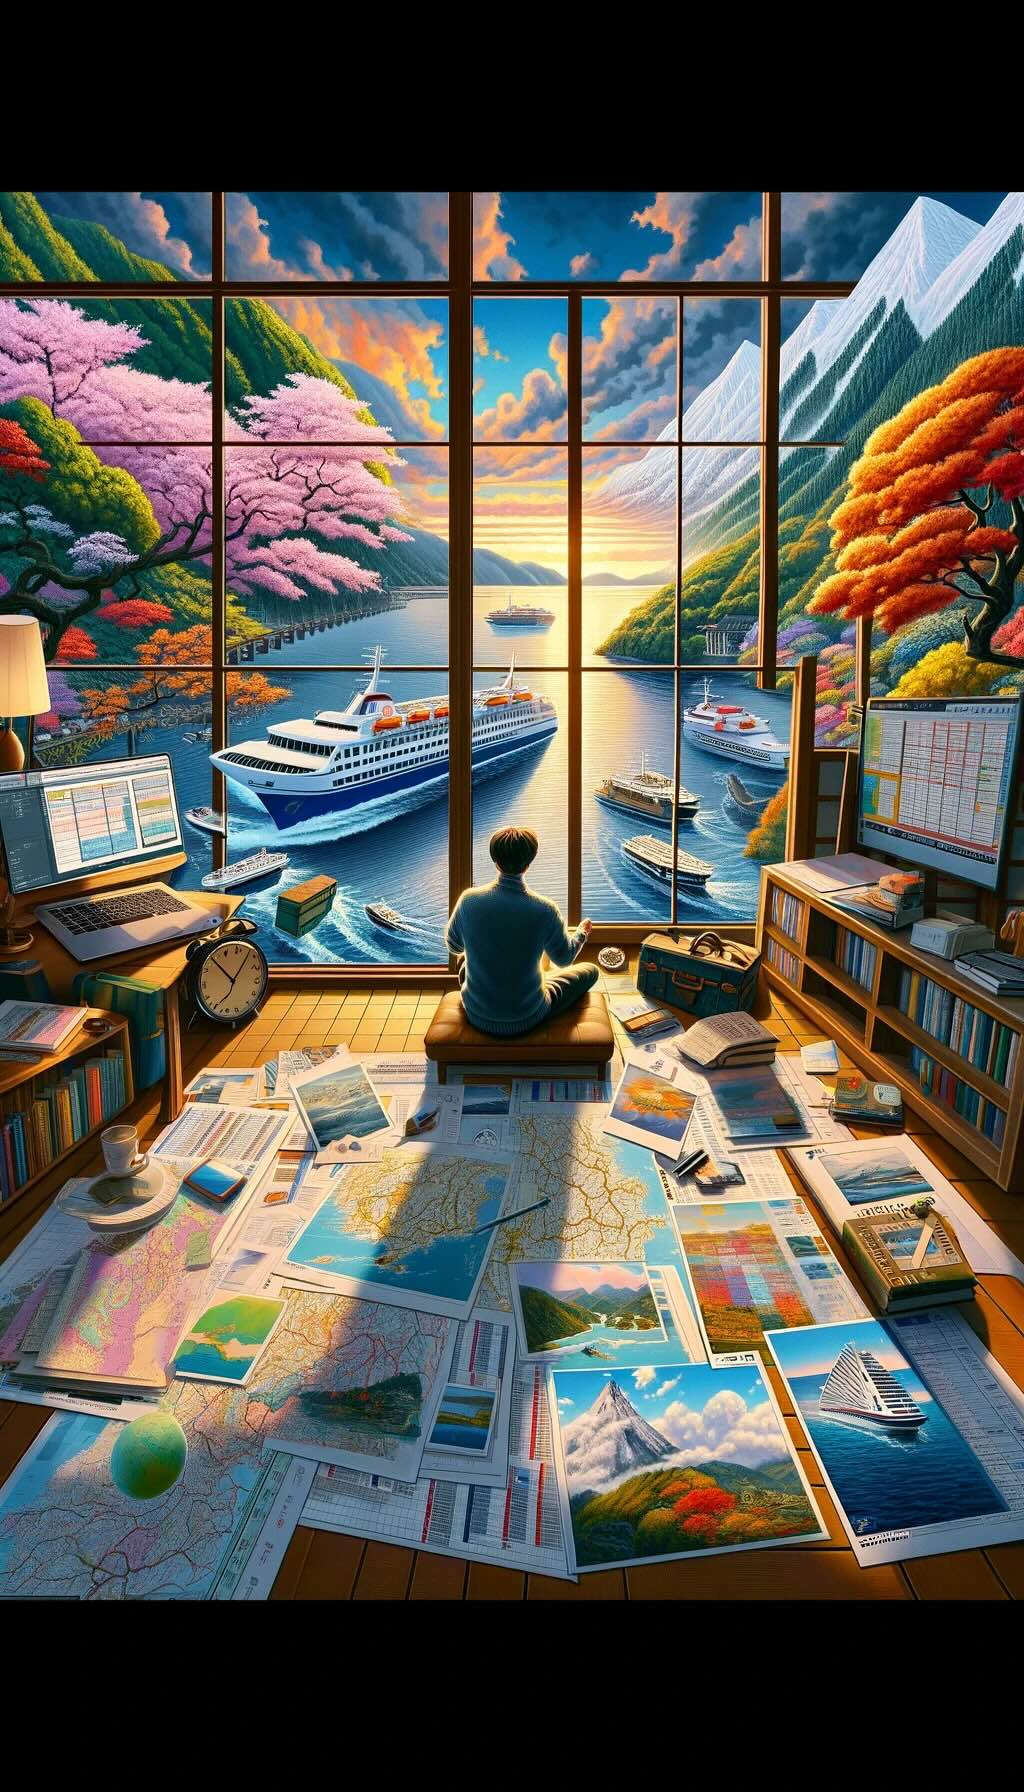 Traveler engrossed in planning a ferry journey across Japan. Surrounded by maps, schedules, and images of iconic Japanese scenery, the scene unfolds in a cozy room filled with travel guides and notes. Through a panoramic window, a picturesque Japanese landscape is visible, divided into quadrants that represent the beauty of each season: spring's cherry blossoms, summer's vibrant greens, autumn's rich hues, and winter's serene snowscapes. It encapsulates the excitement and thoughtfulness of planning a maritime adventure.